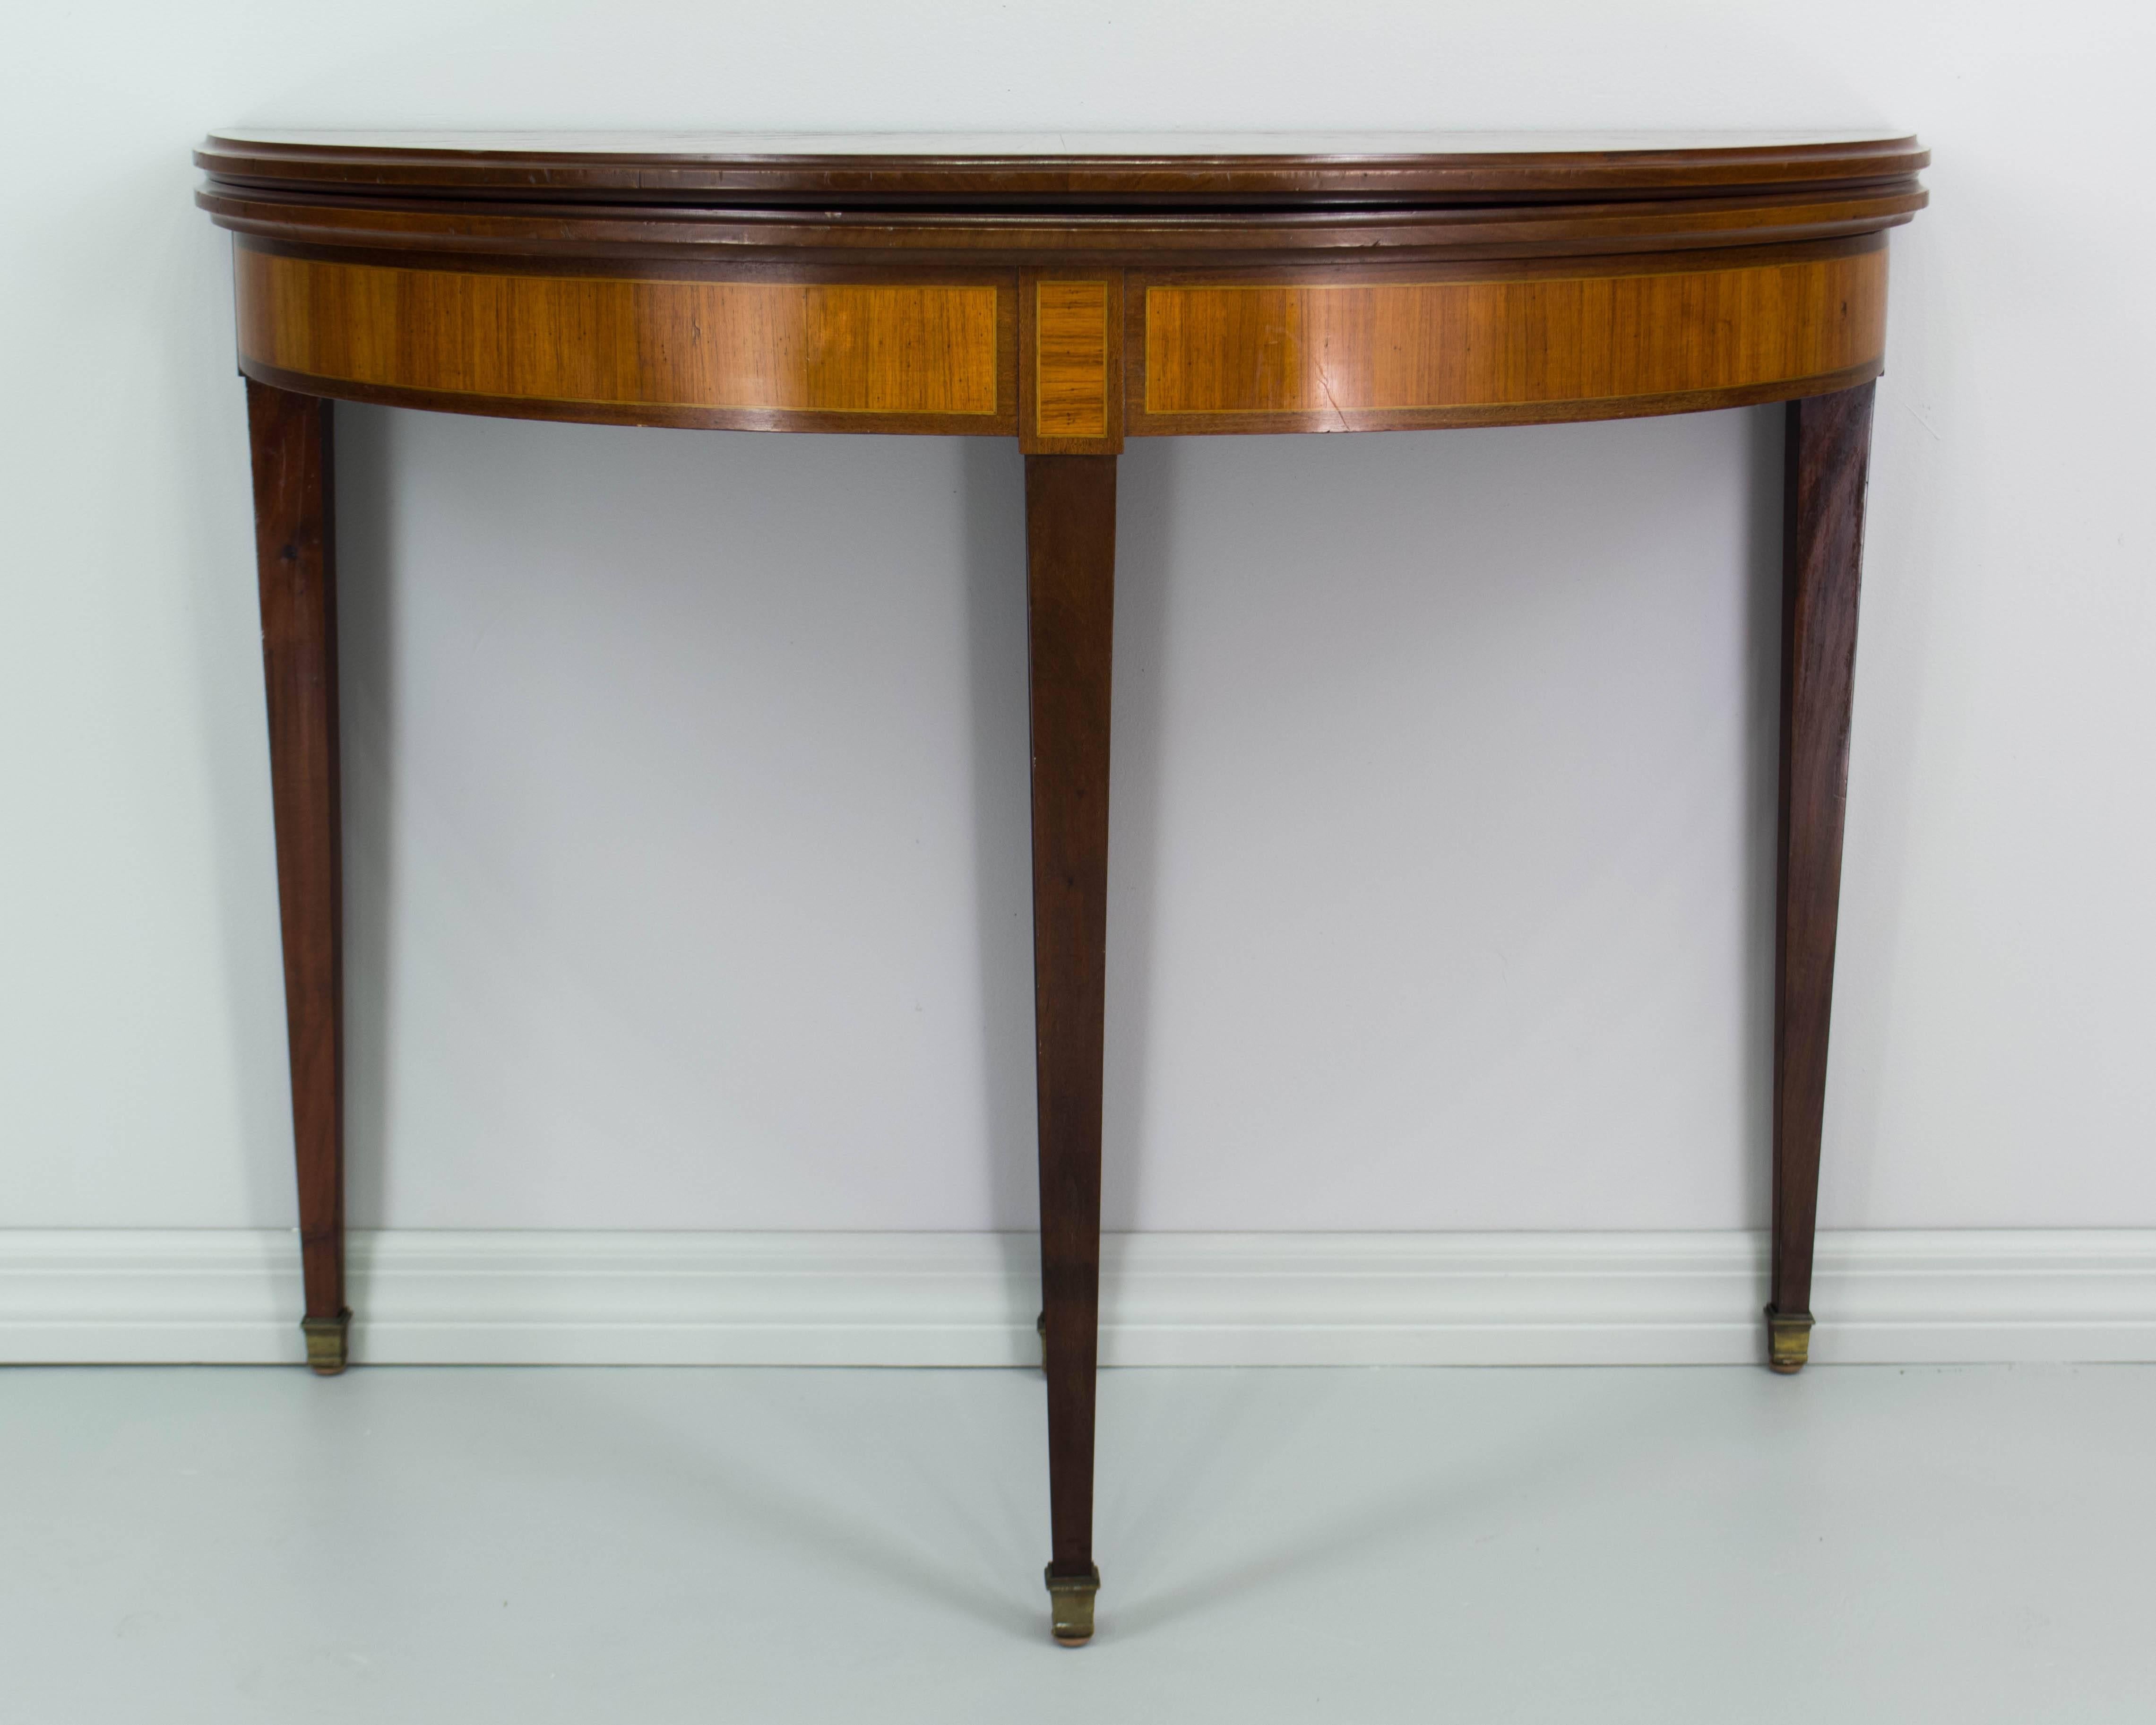 A fine French Louis XVI style demilune console that opens to a game table. Marquetry top is inlaid with veneers of mahogany and walnut. Four tapered legs ending in brass sabots. Top hinges open and rests on center leg which pulls out to reveal